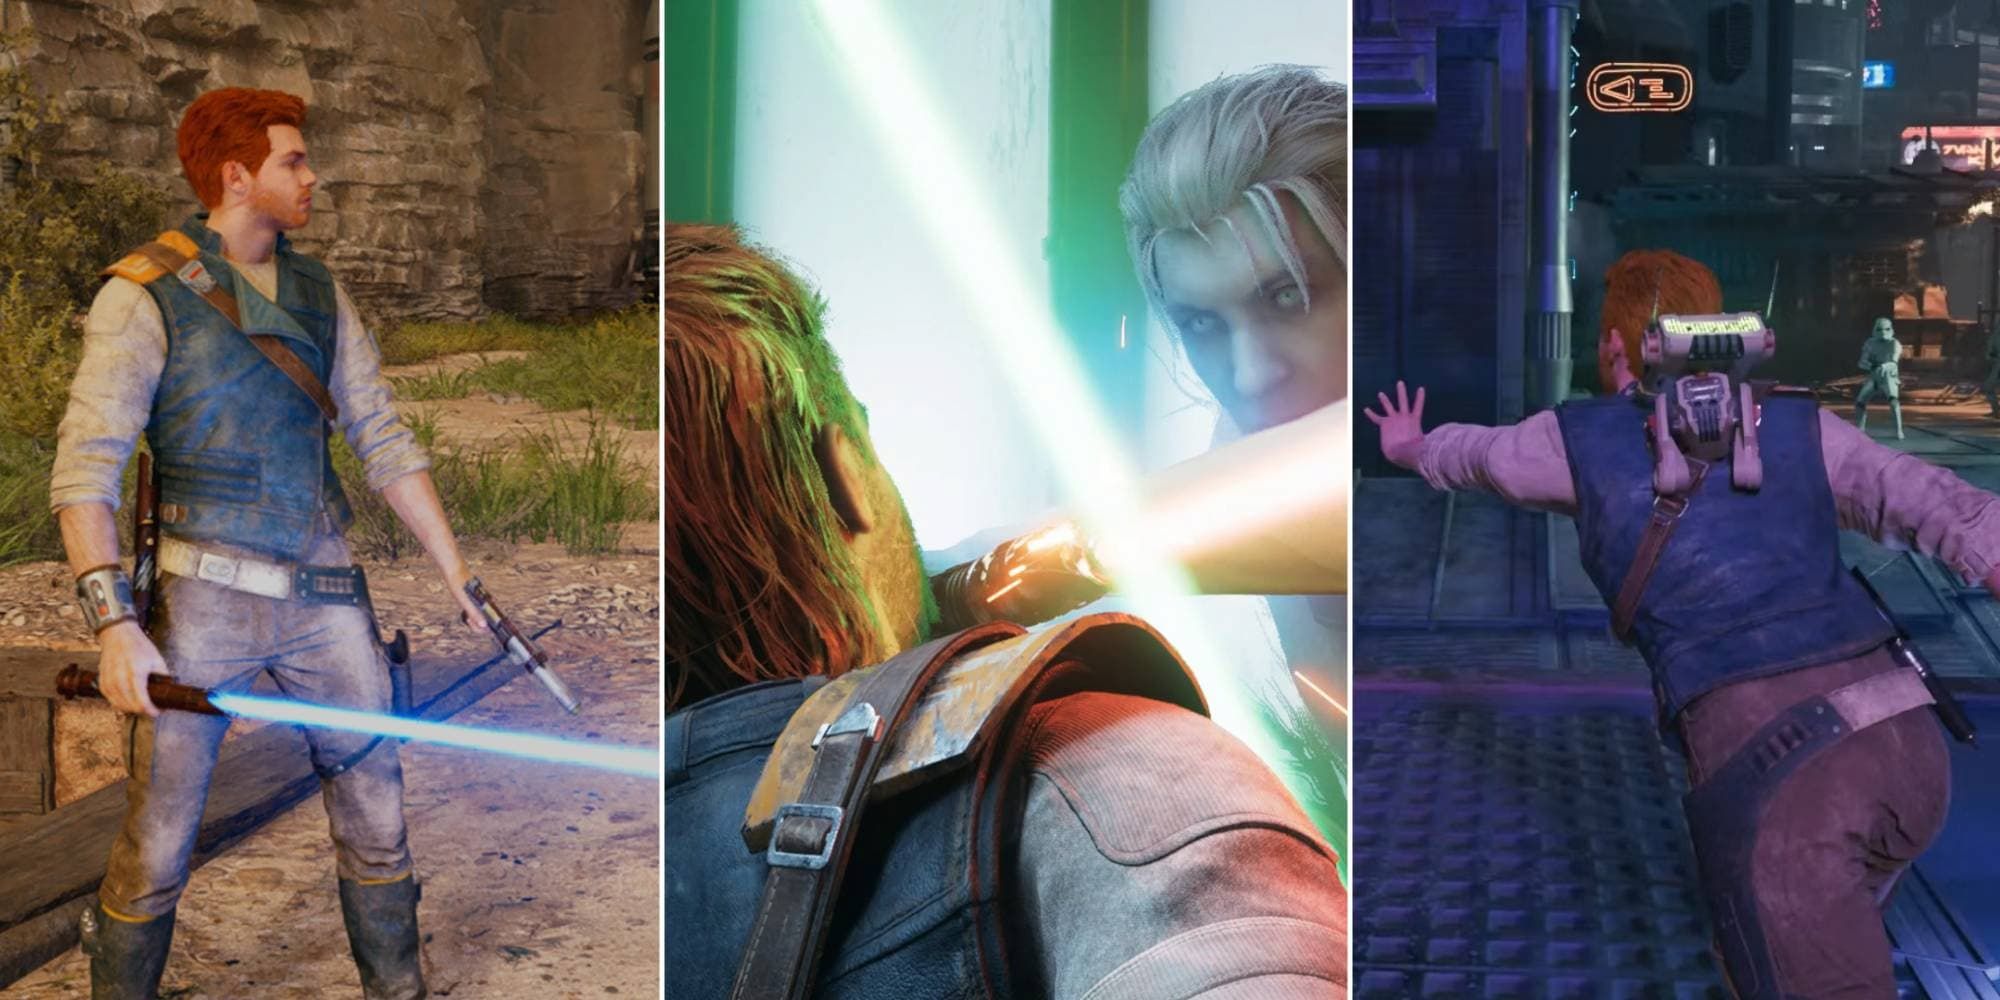 Cal stands in his Blaster stance, he locks lightsabers with Dagan Gera, and he uses Force Push on a Stormtrooper in Star Wars Jedi: Survivor.